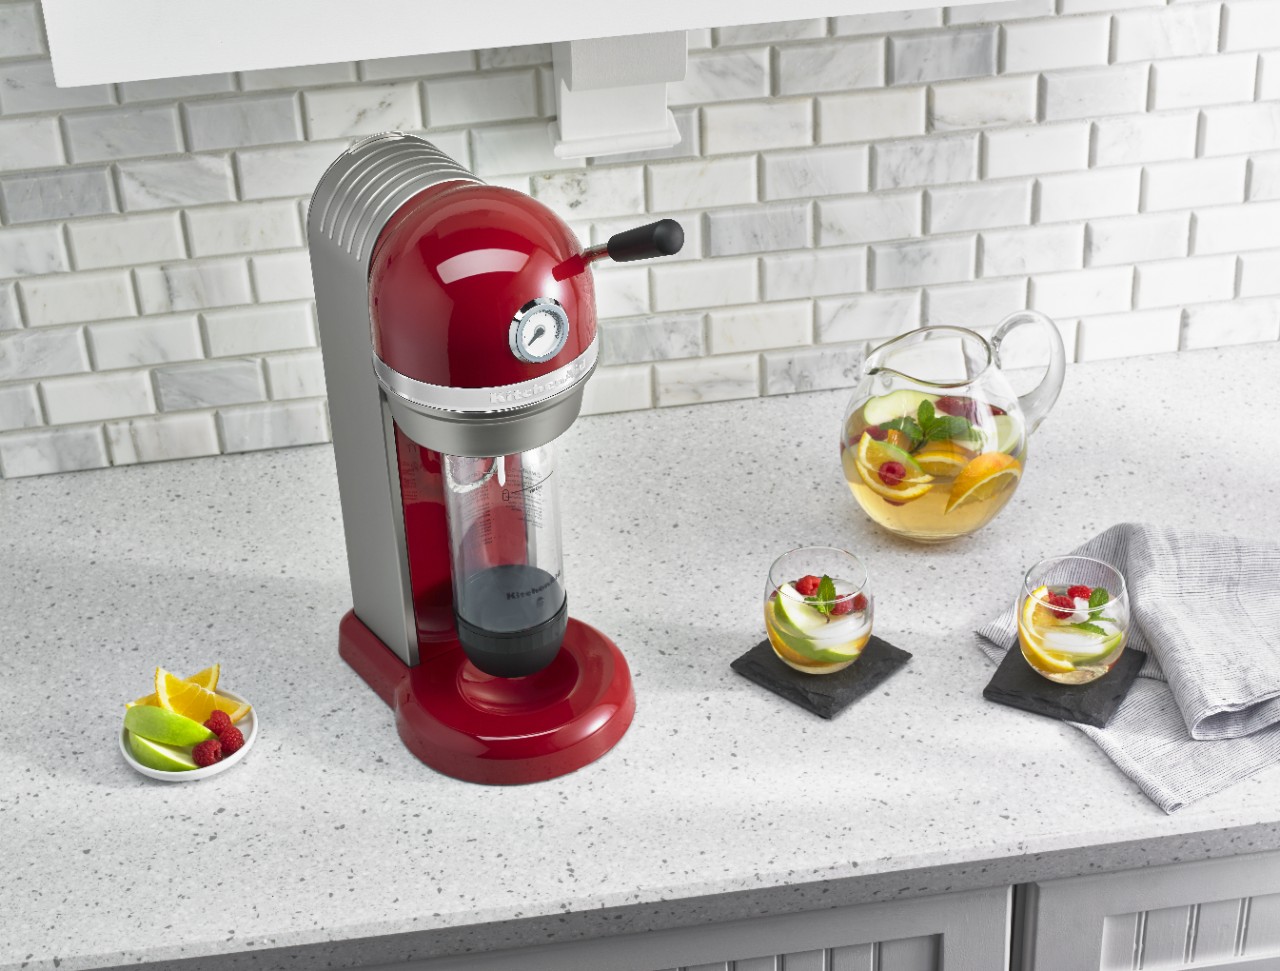 With the help of KitchenAid, make carbonated water in minutes.